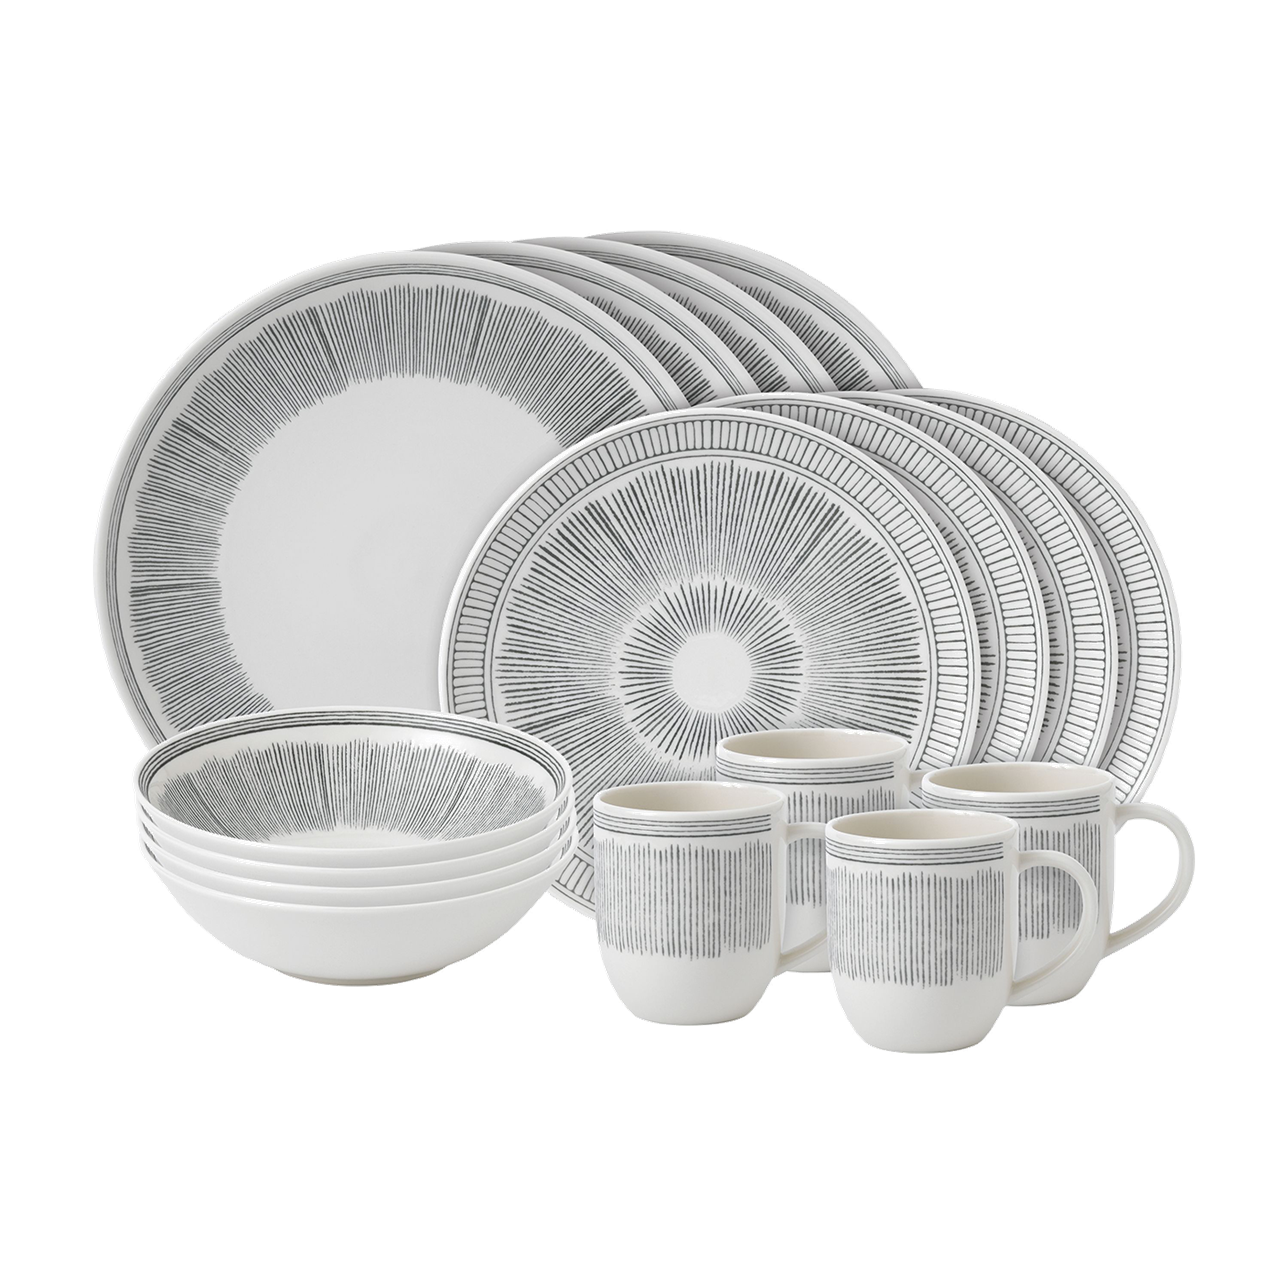 ED Charcoal Grey Lines 16 Piece Dinner Set